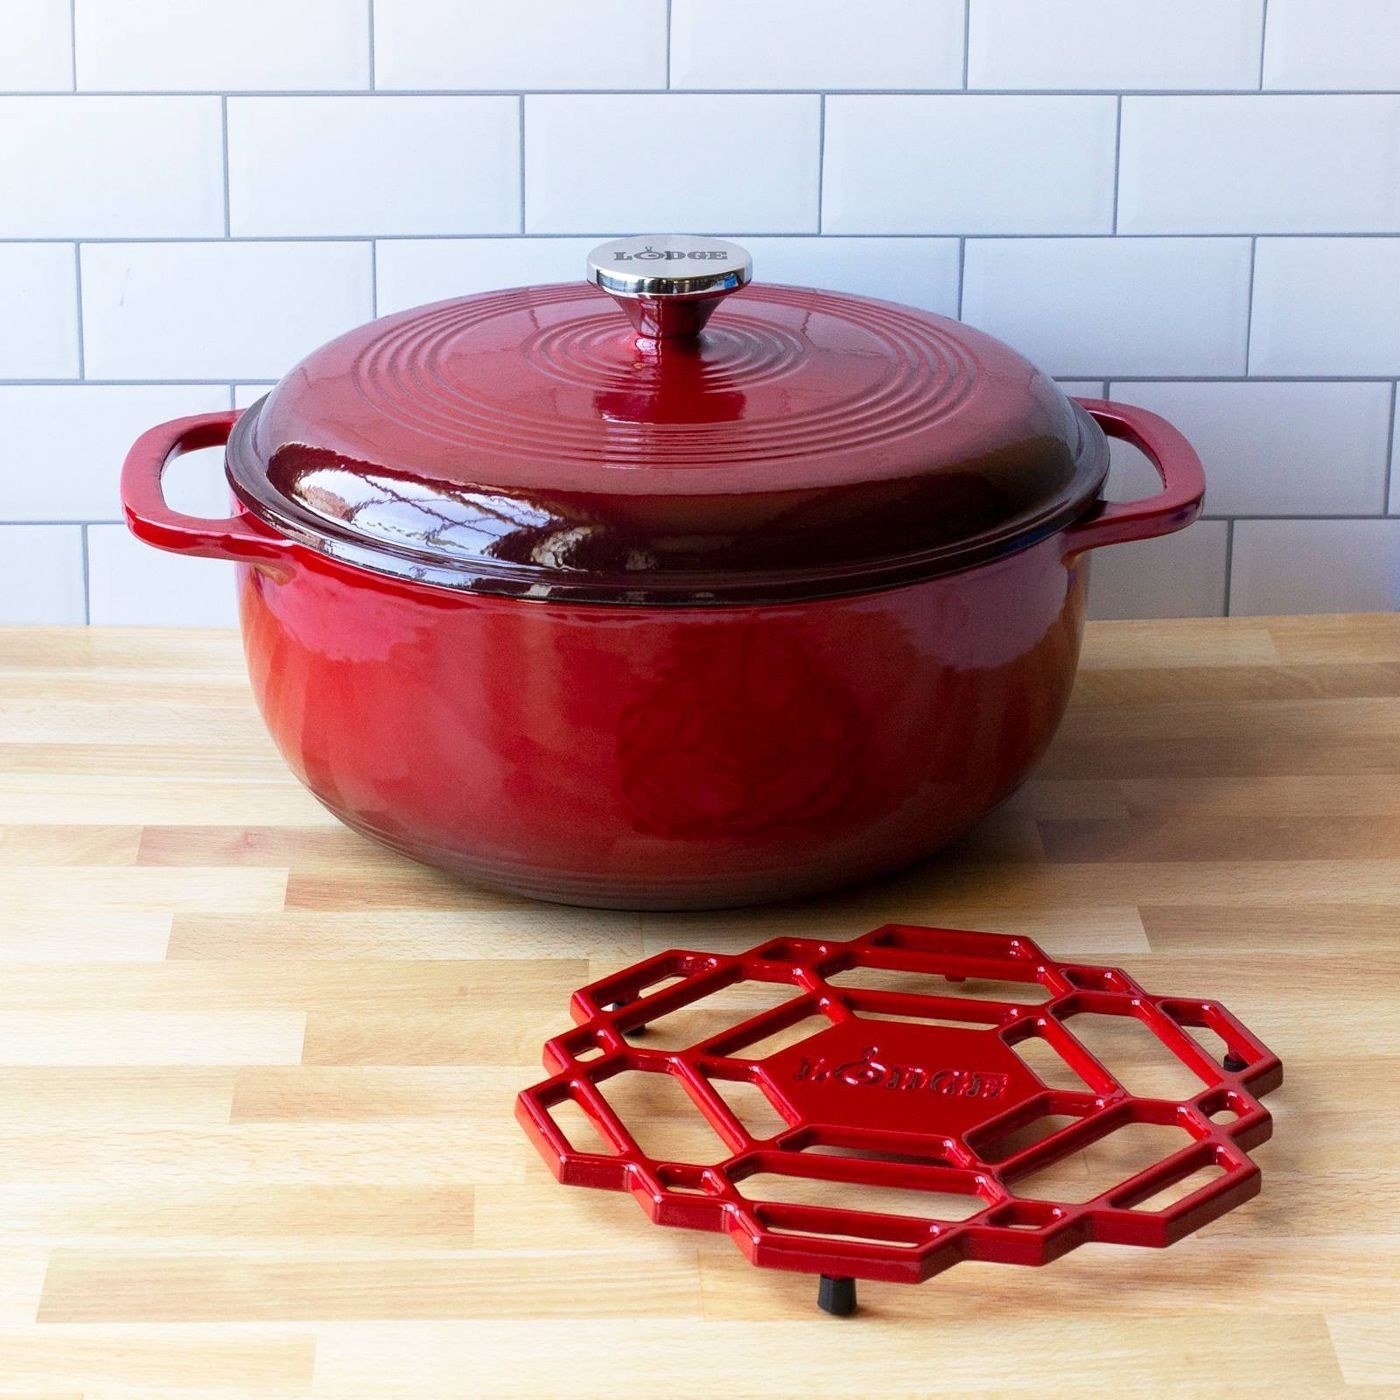 red dutch oven with stainless steel handle